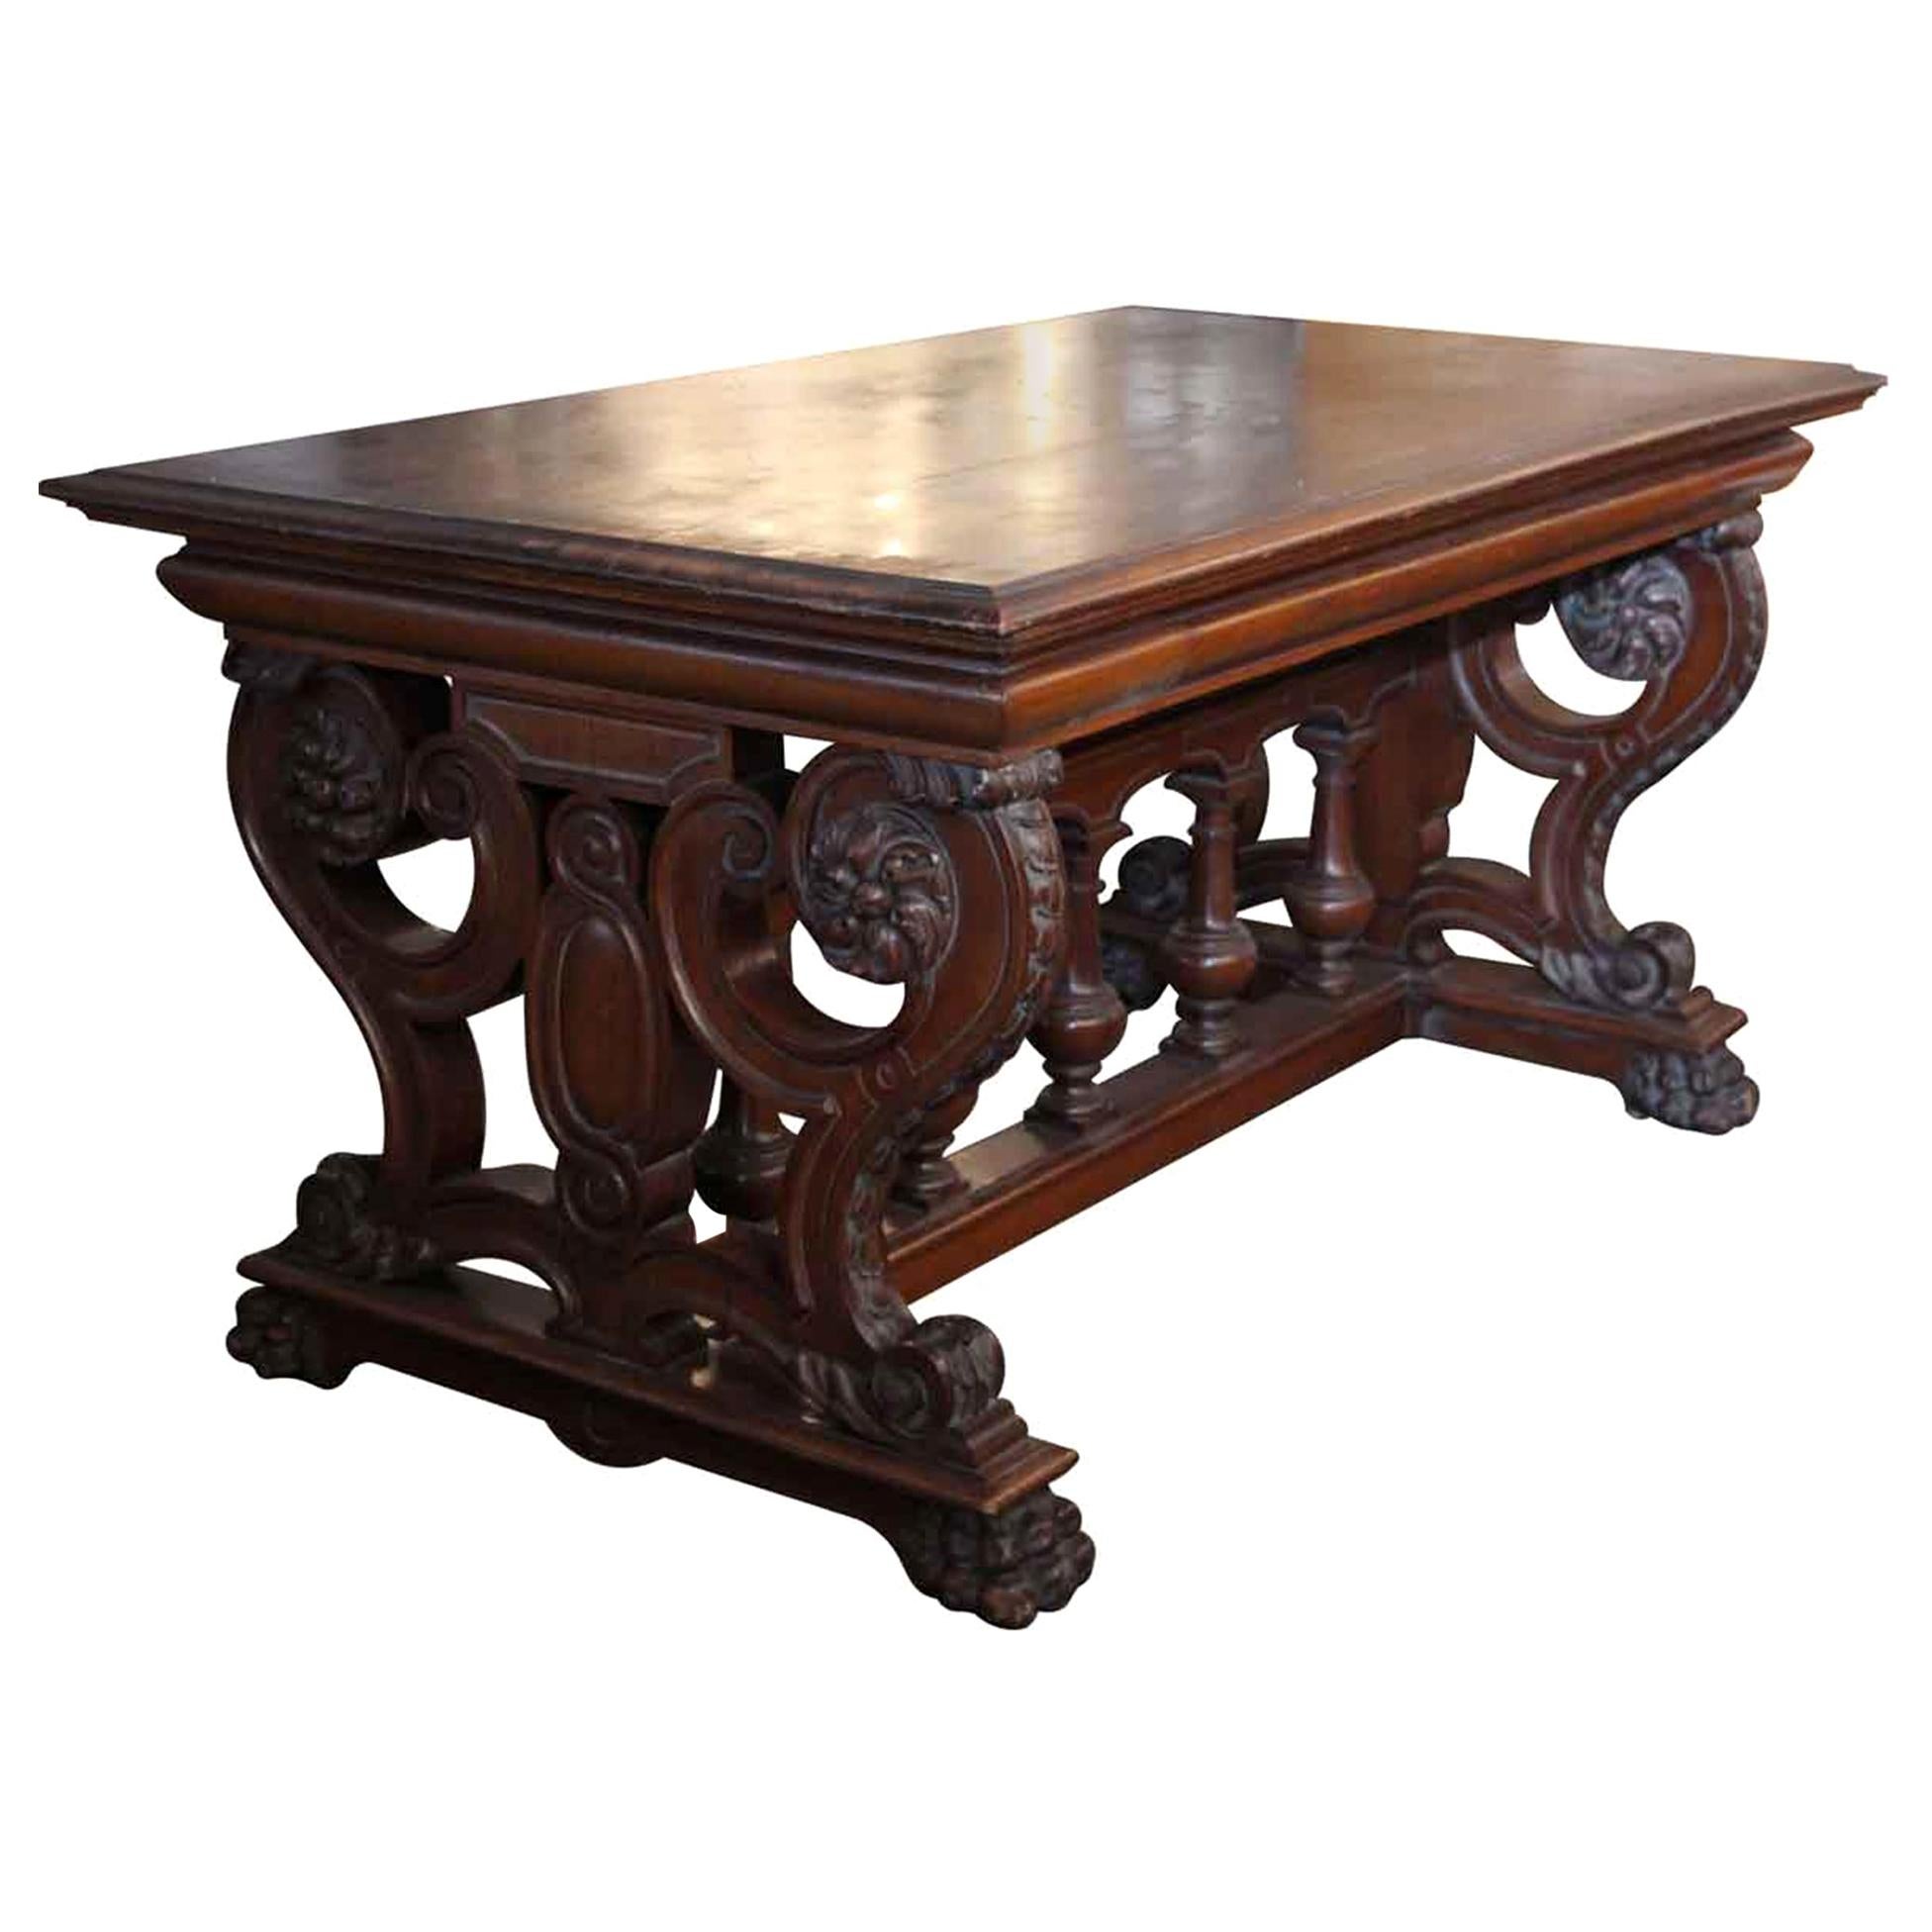 Late 1880s Dark Tone Ornate Hand Carved Wood Library Table by Rj Horner 